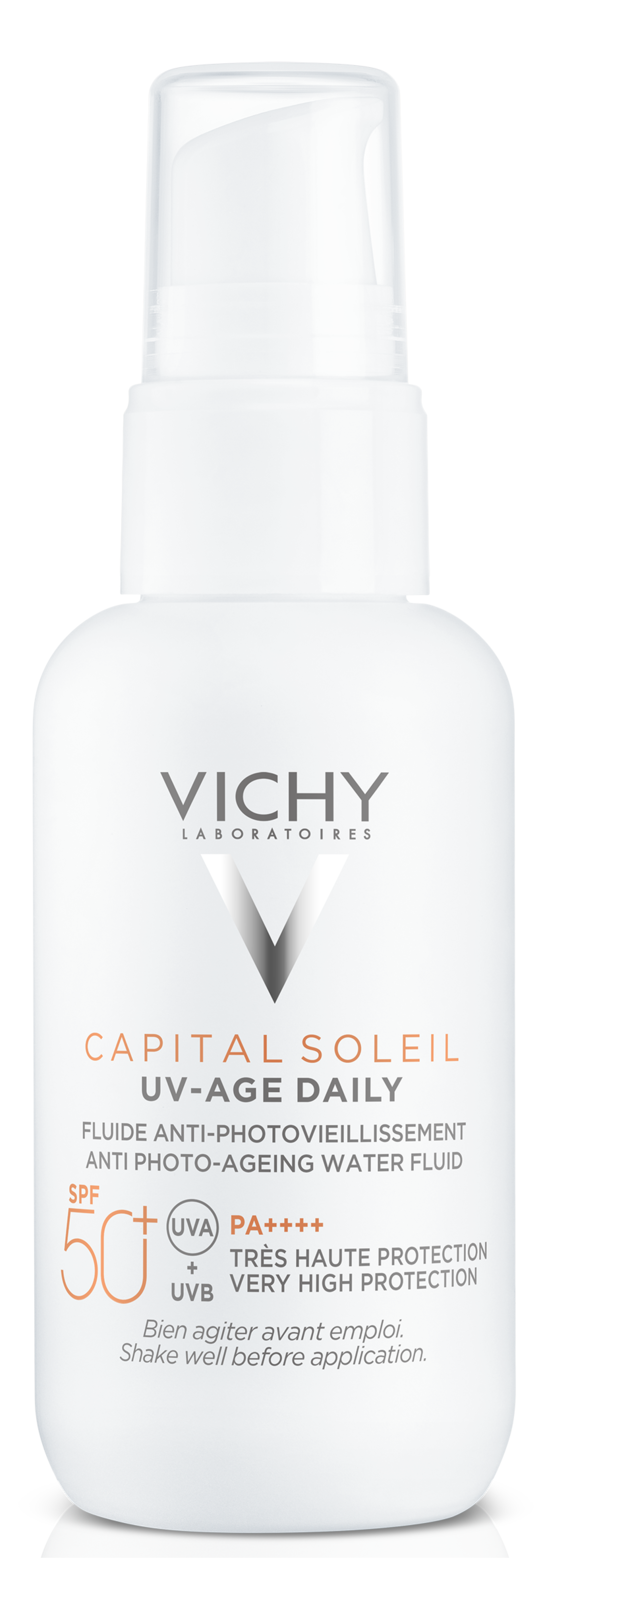 Image of Vichy Capital Soleil UV-Age Daily SPF50+